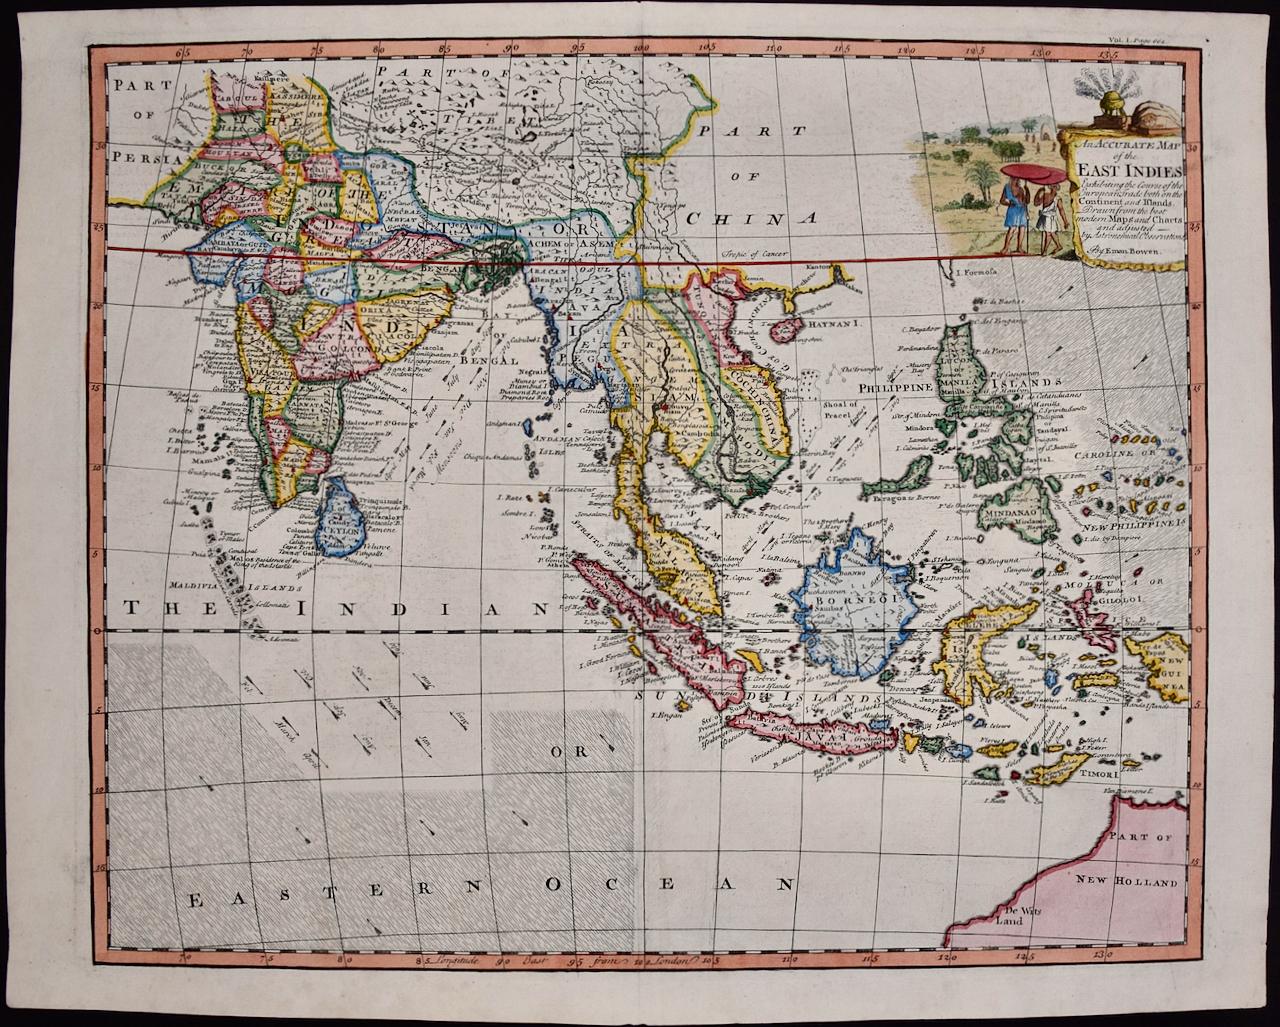 Map of the East Indies: An Original 18th Century Hand-colored Map by E. Bowen